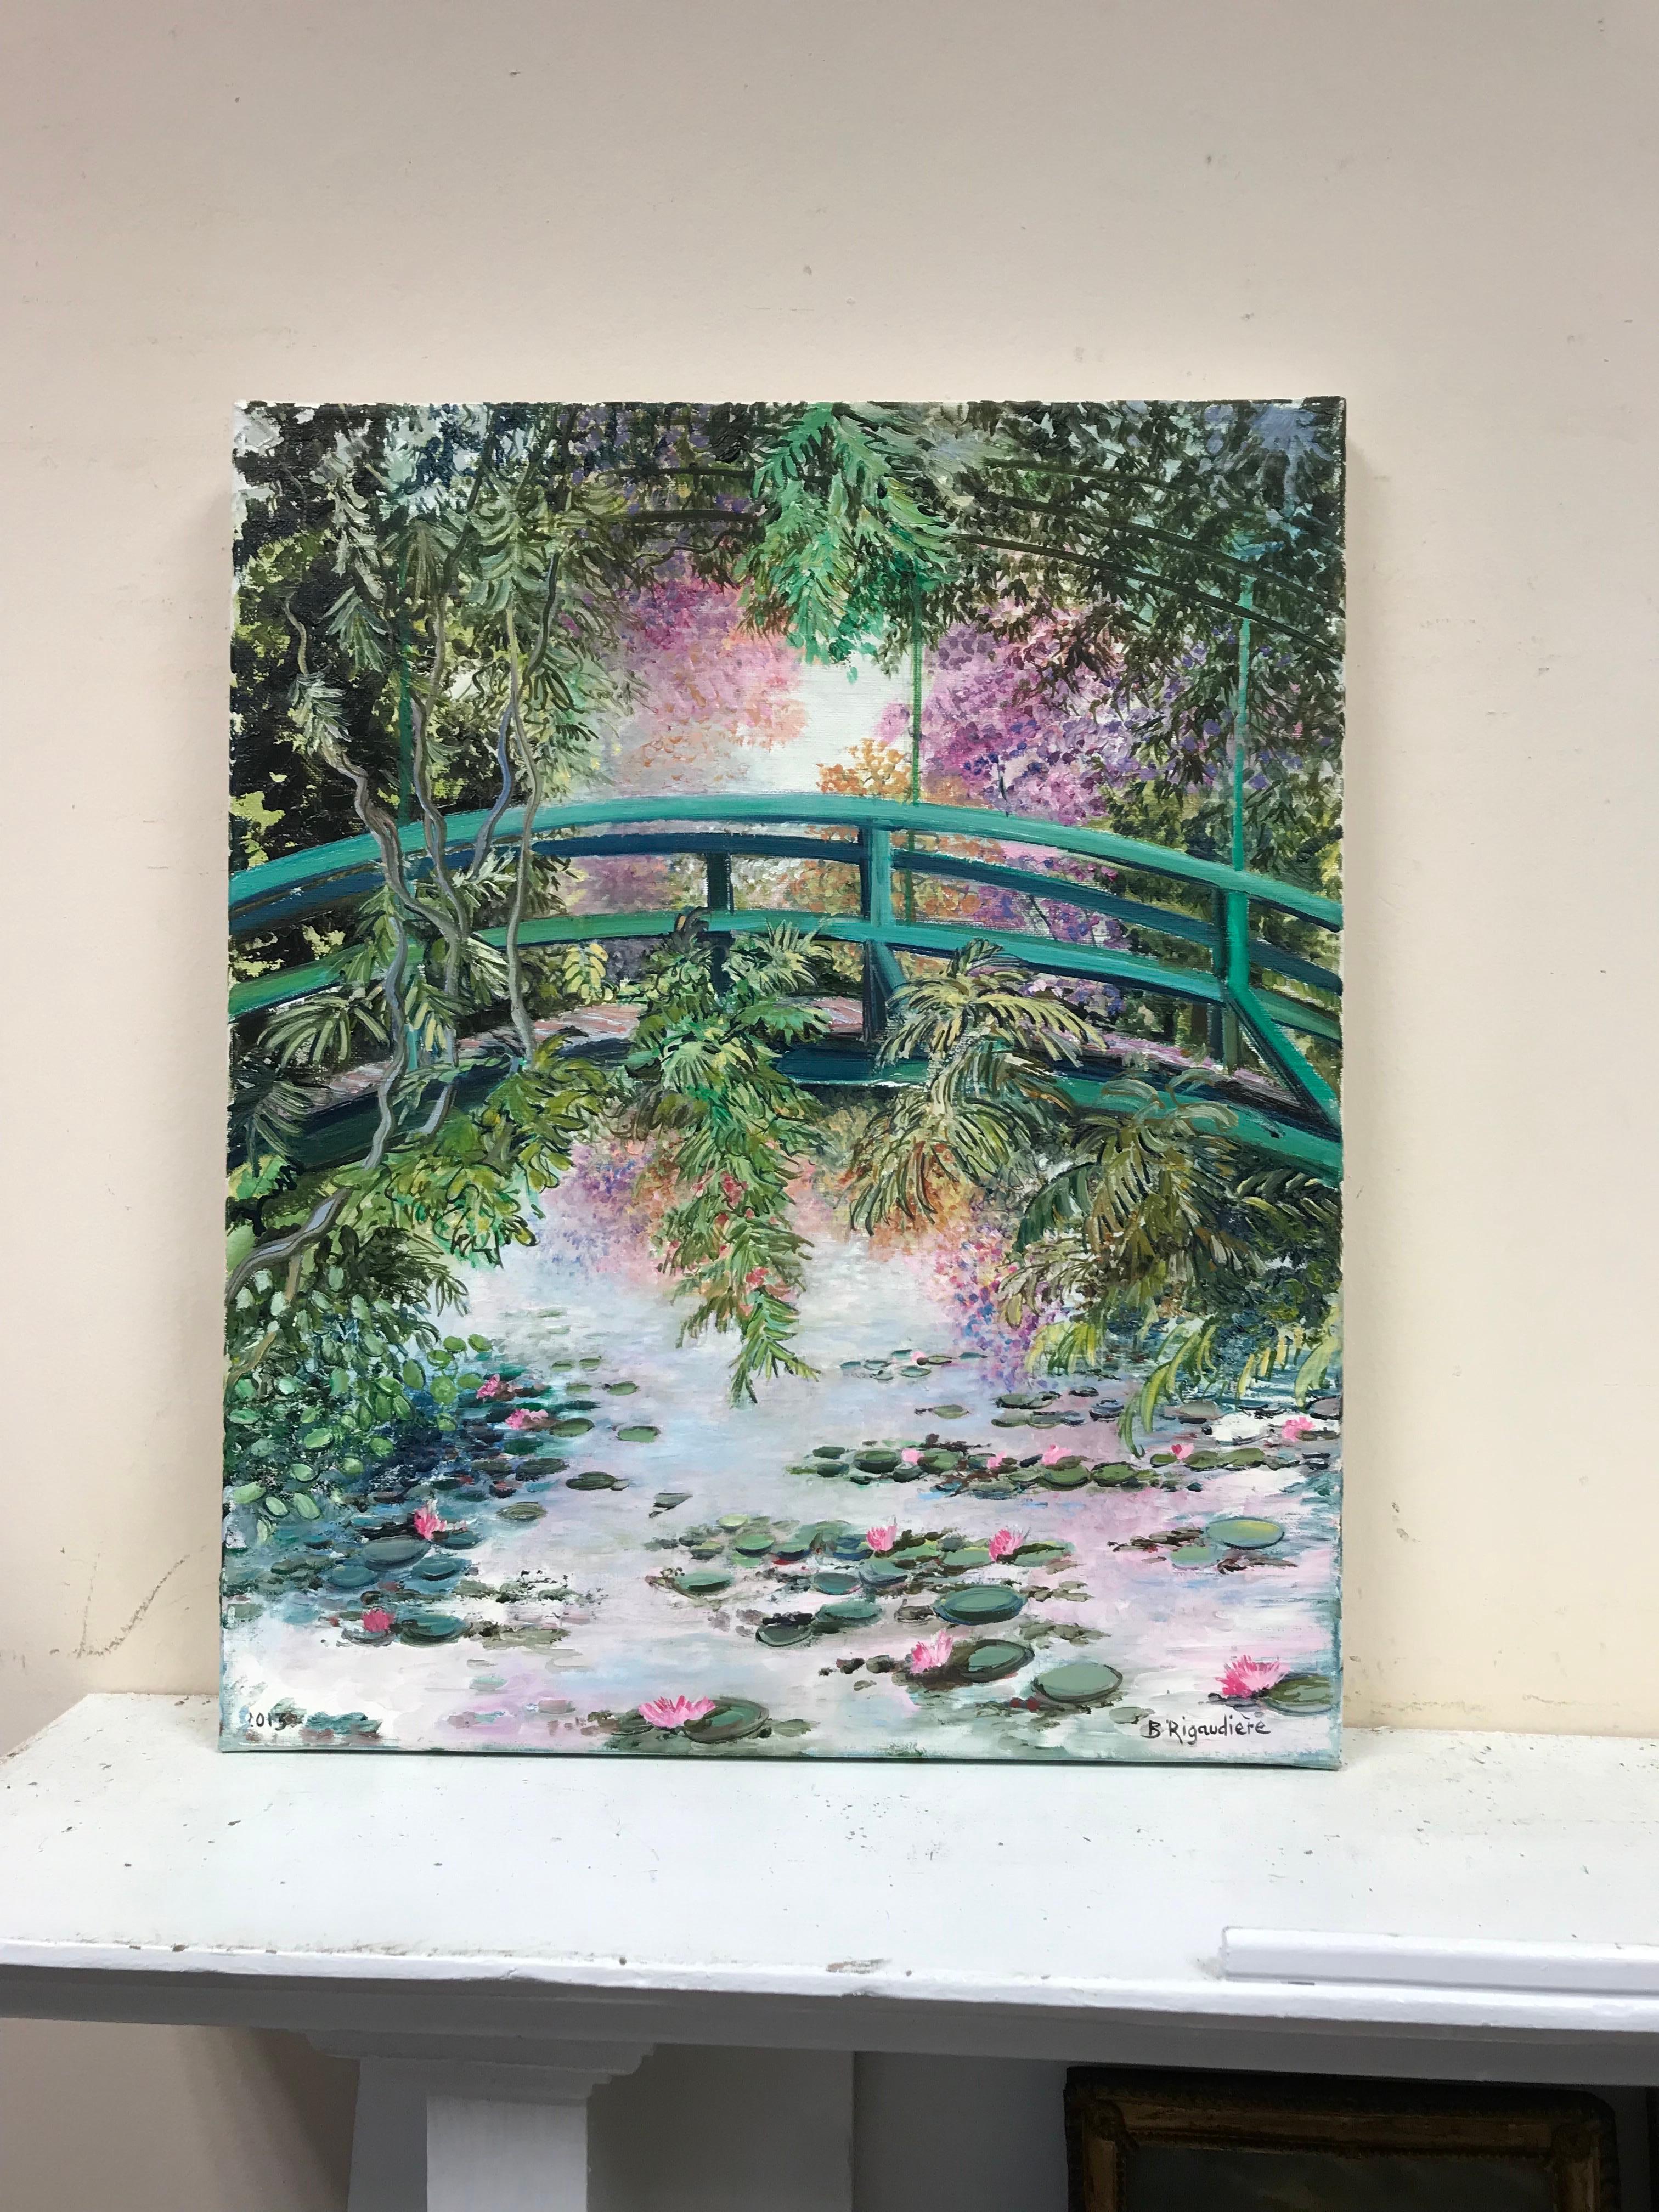 Japanese Bridge Monet's Waterlily Pond Giverny, Signed French Impressionist Oil - Painting by B. Rigaudiere